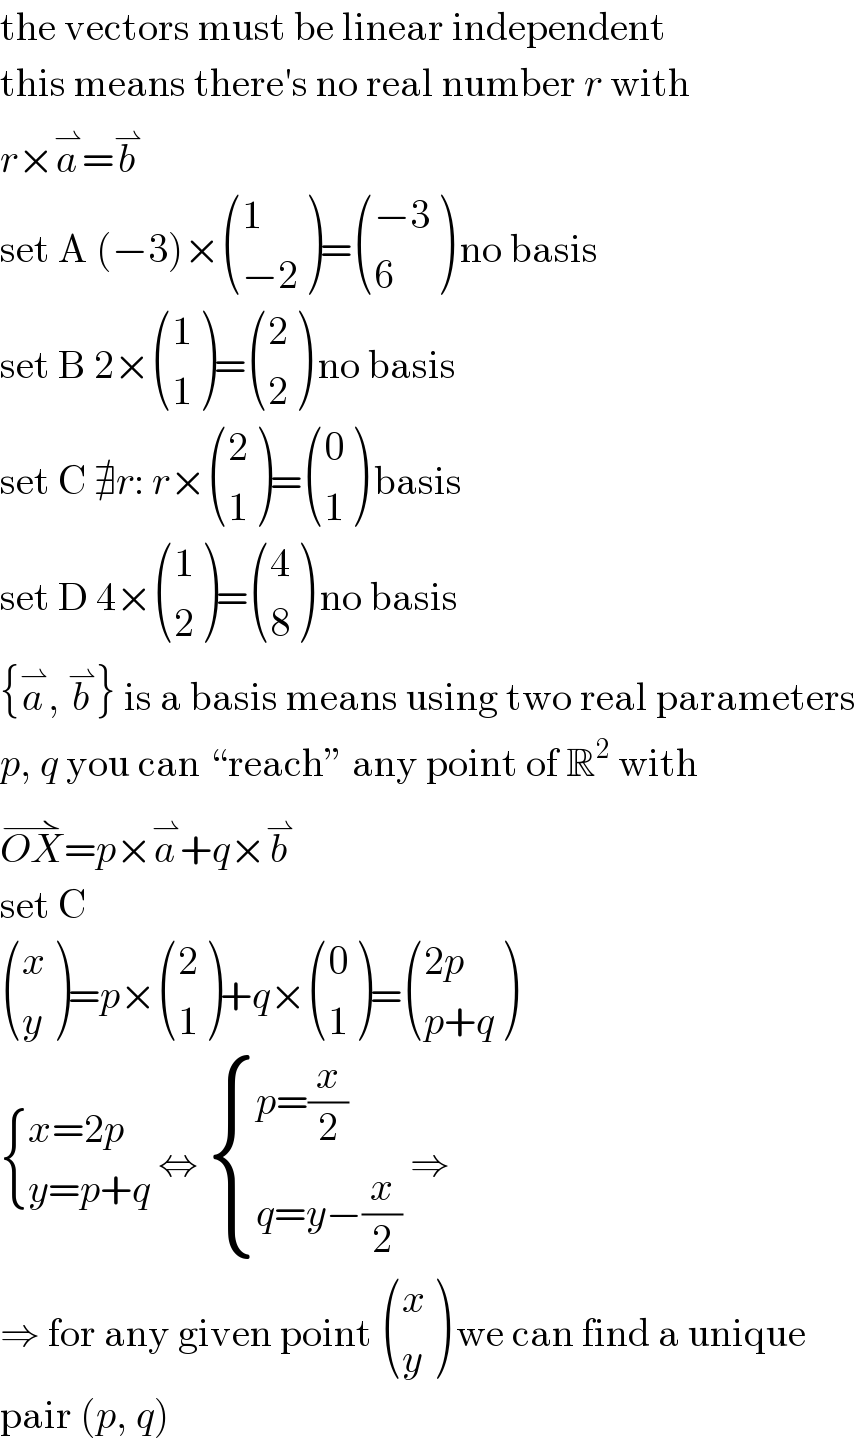 the vectors must be linear independent  this means there′s no real number r with  r×a^⇀ =b^⇀   set A (−3)× ((1),((−2)) )= (((−3)),(6) ) no basis  set B 2× ((1),(1) )= ((2),(2) ) no basis  set C ∄r: r× ((2),(1) )= ((0),(1) ) basis  set D 4× ((1),(2) )= ((4),(8) ) no basis  {a^⇀ , b^⇀ } is a basis means using two real parameters  p, q you can “reach” any point of R^2  with  OX^(⇀) =p×a^⇀ +q×b^⇀   set C   ((x),(y) )=p× ((2),(1) )+q× ((0),(1) )= (((2p)),((p+q)) )   { ((x=2p)),((y=p+q)) :} ⇔  { ((p=(x/2))),((q=y−(x/2))) :} ⇒  ⇒ for any given point  ((x),(y) ) we can find a unique  pair (p, q)  